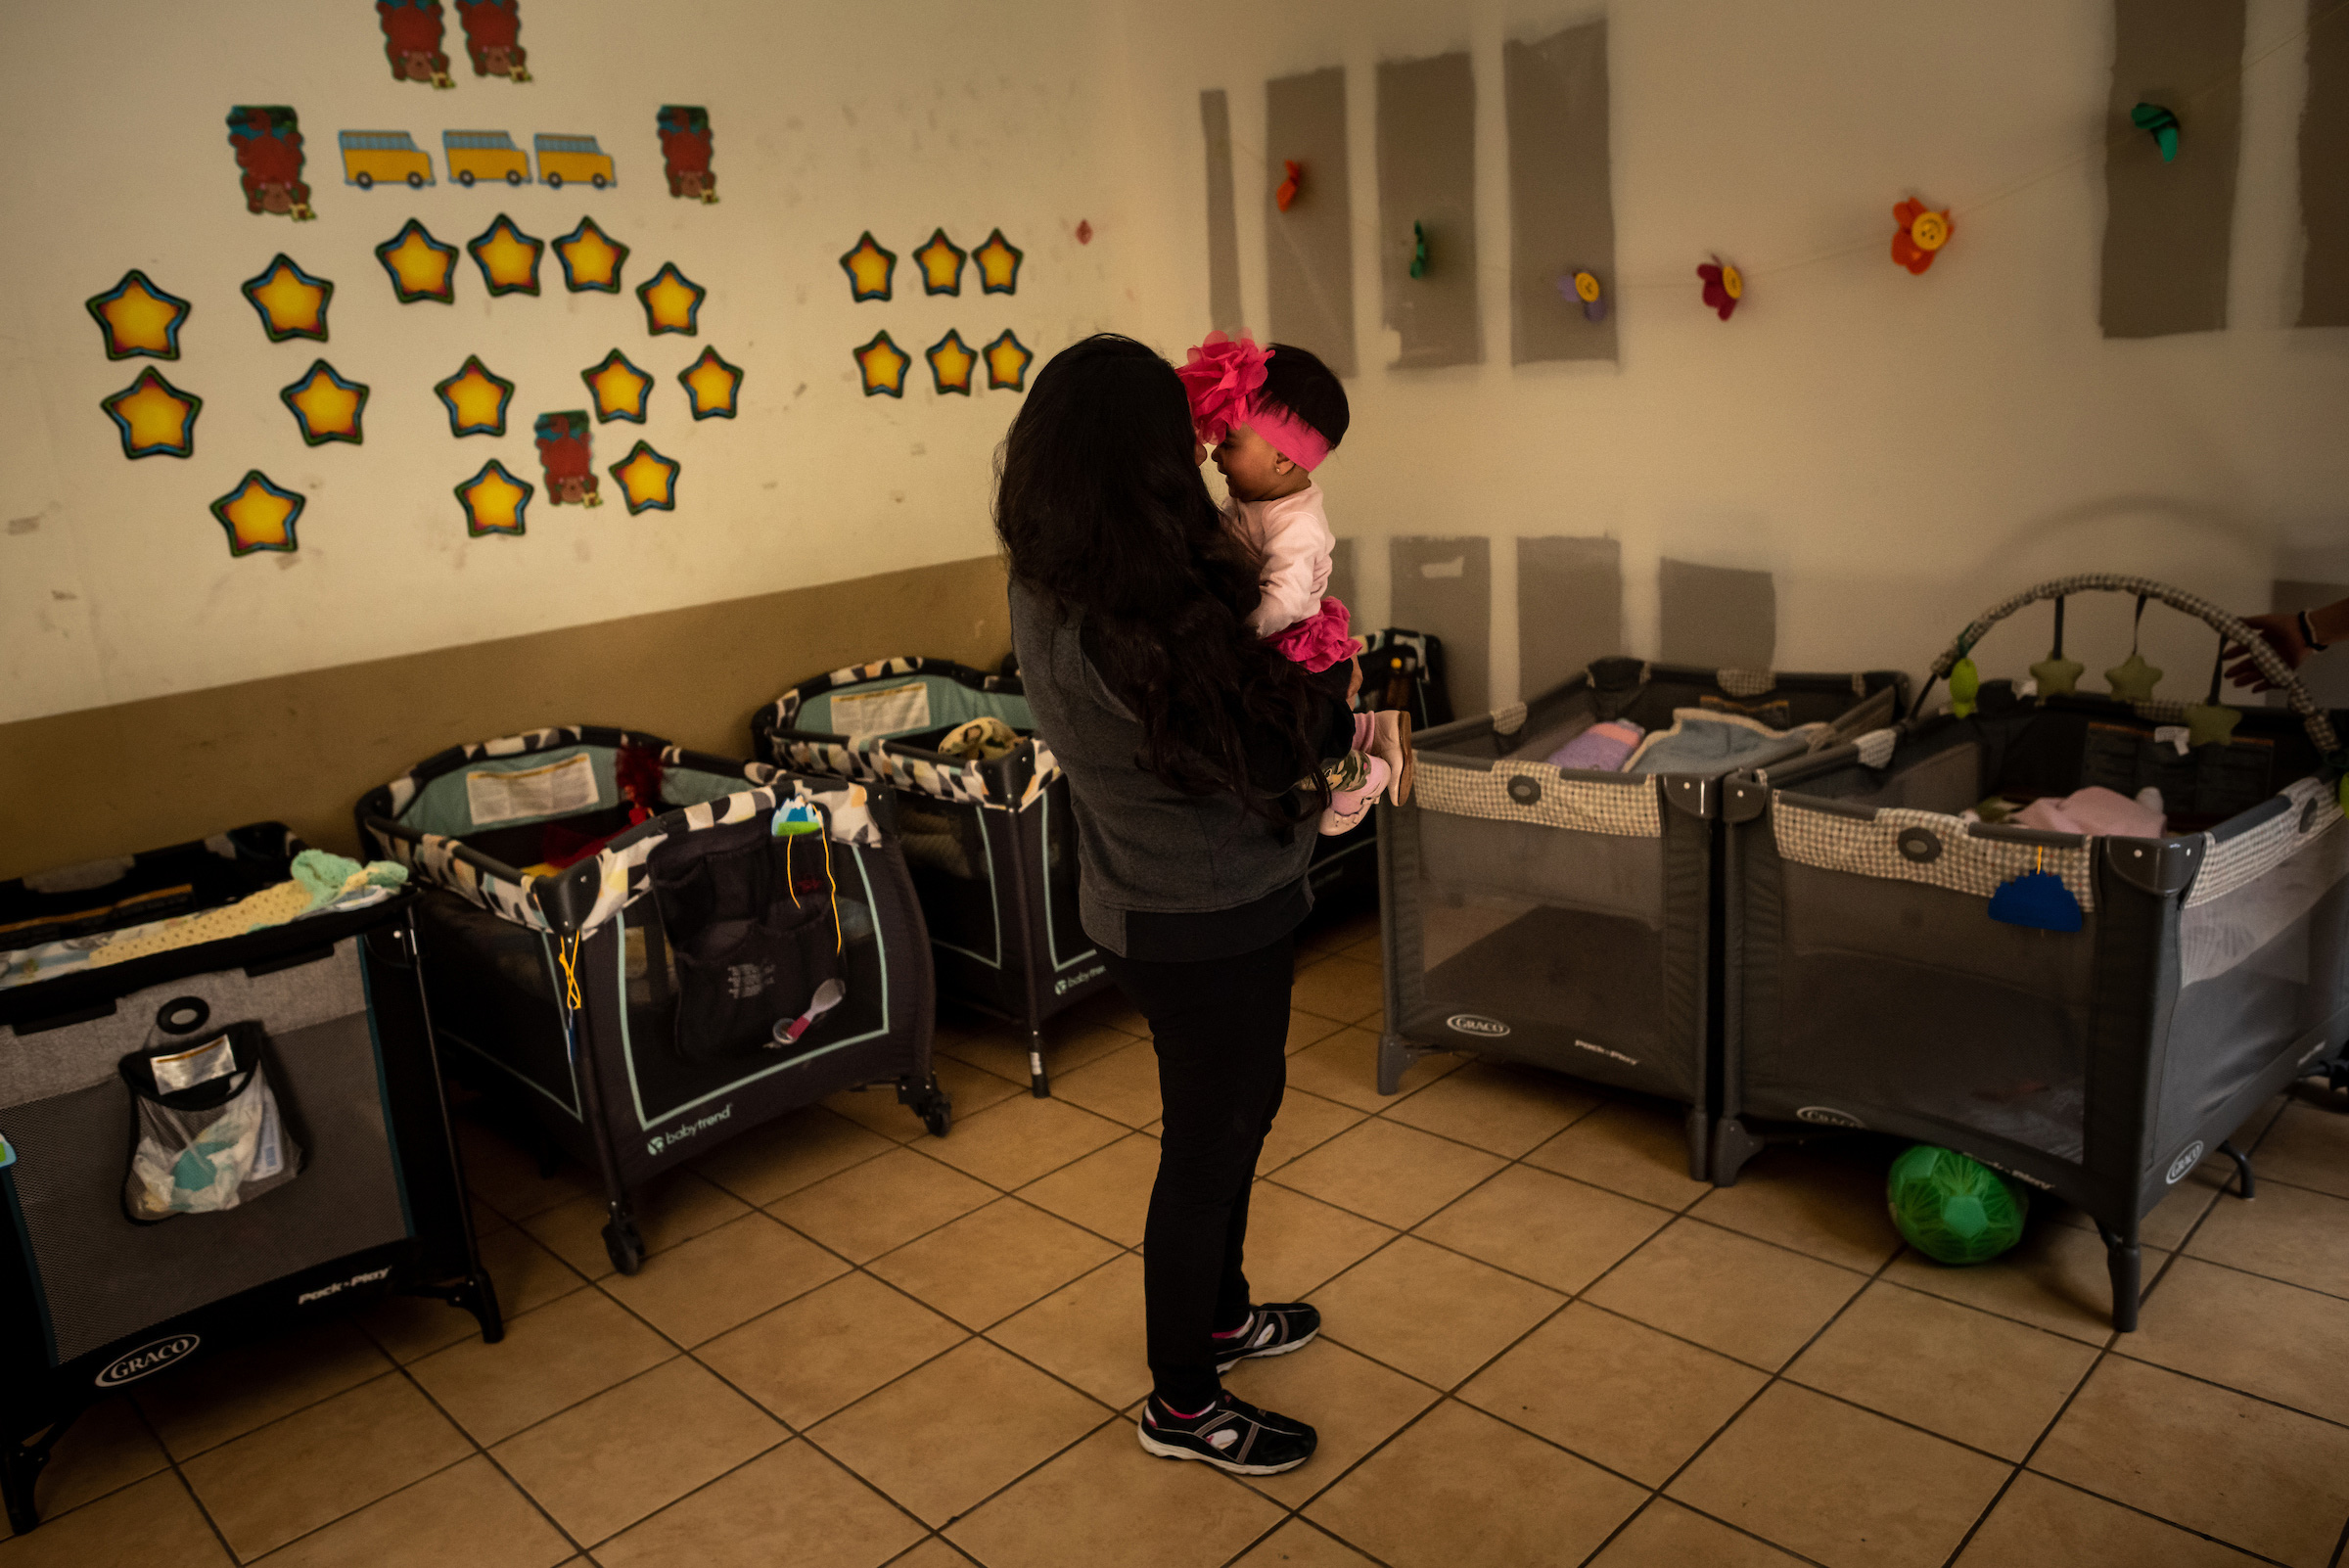 Xiomara plays with her baby in the nursery of the San Juan Apóstol migrant shelter. After fleeing gang violence in El Salvador, she arrived at the U.S.-Mexico border pregnant with her fourth child hoping to claim asylum. She gave birth in Ciudad Juárez, Mexico, with the help of volunteers. (Meridith Kohut for TIME)